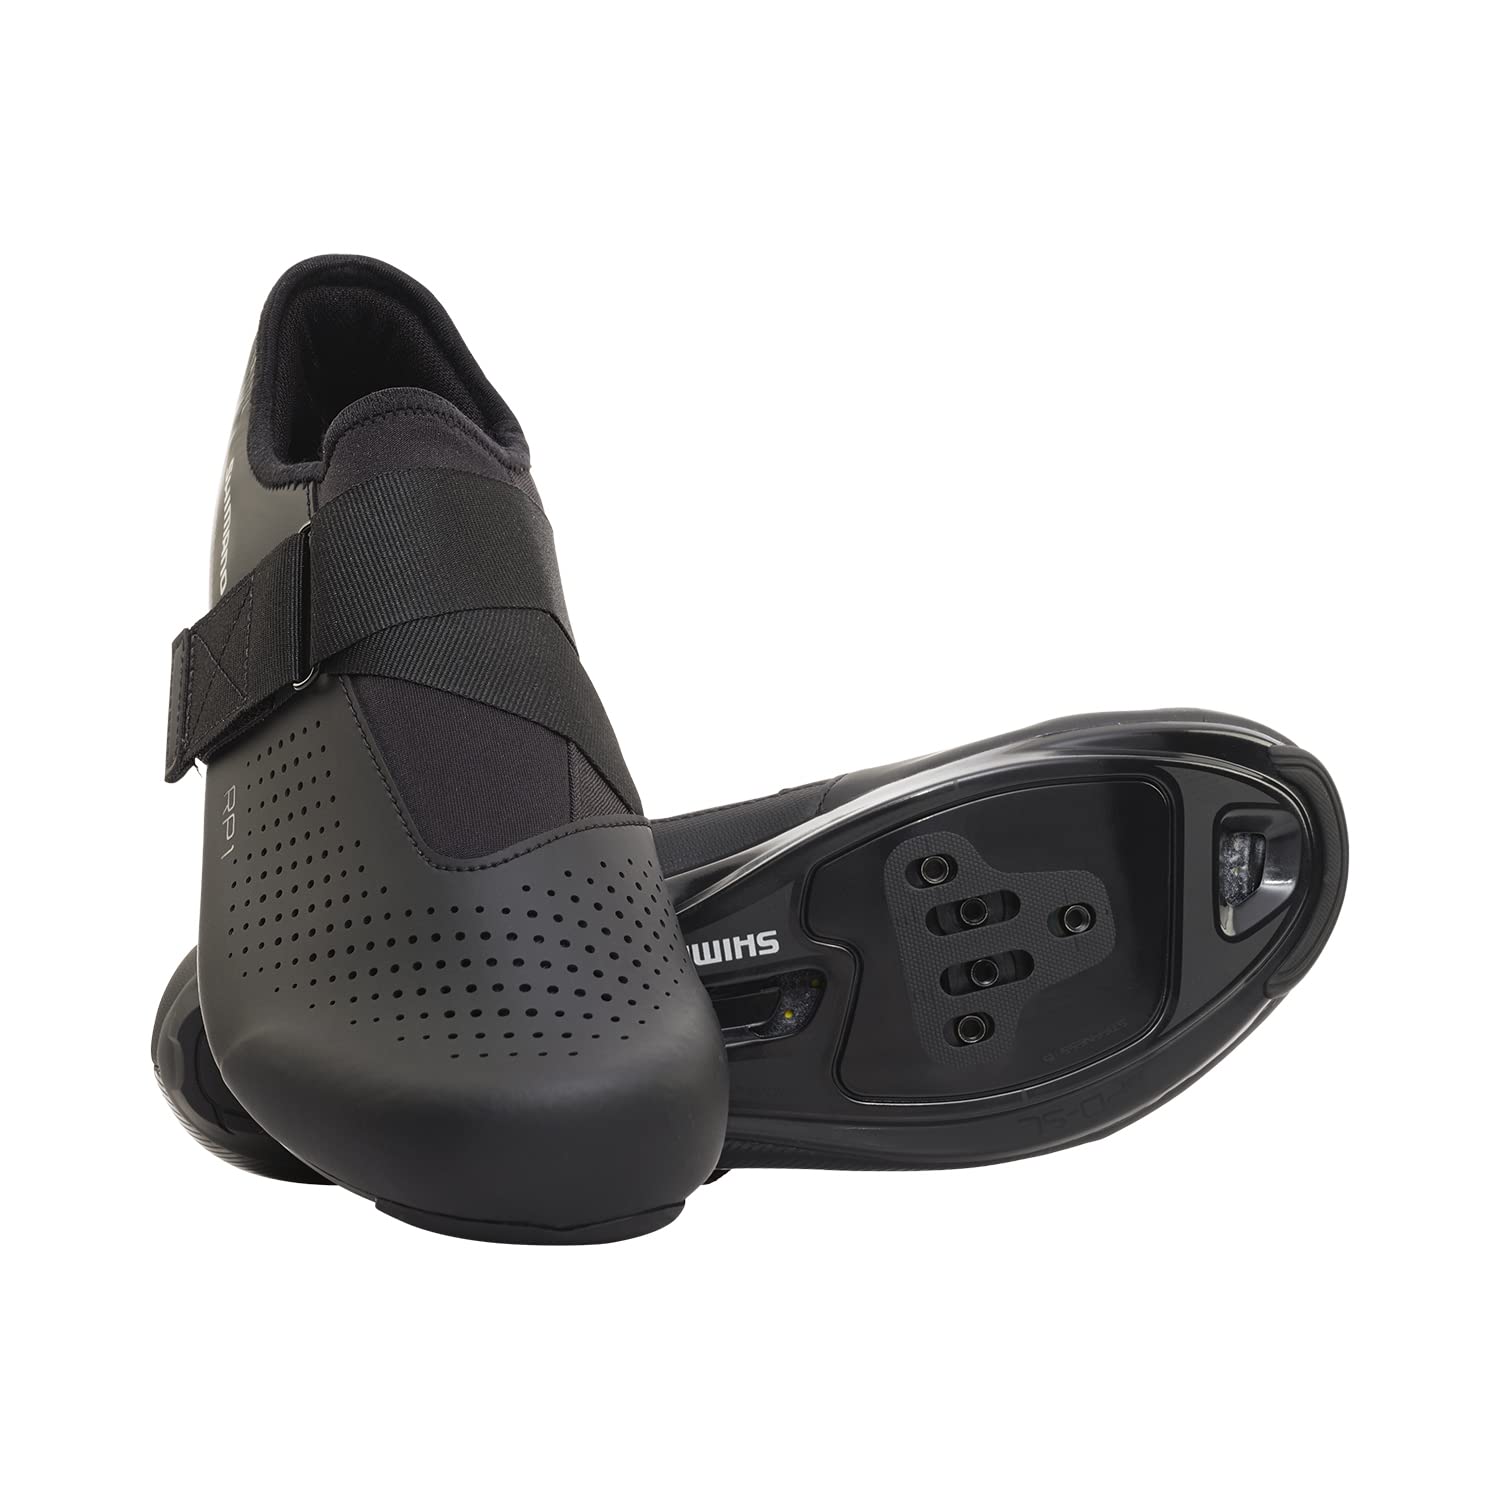 SHIMANO SH RP1 Unisex Cycling Shoe Road Bike Indoor Riding Shoe for Men and Women, All Rounder